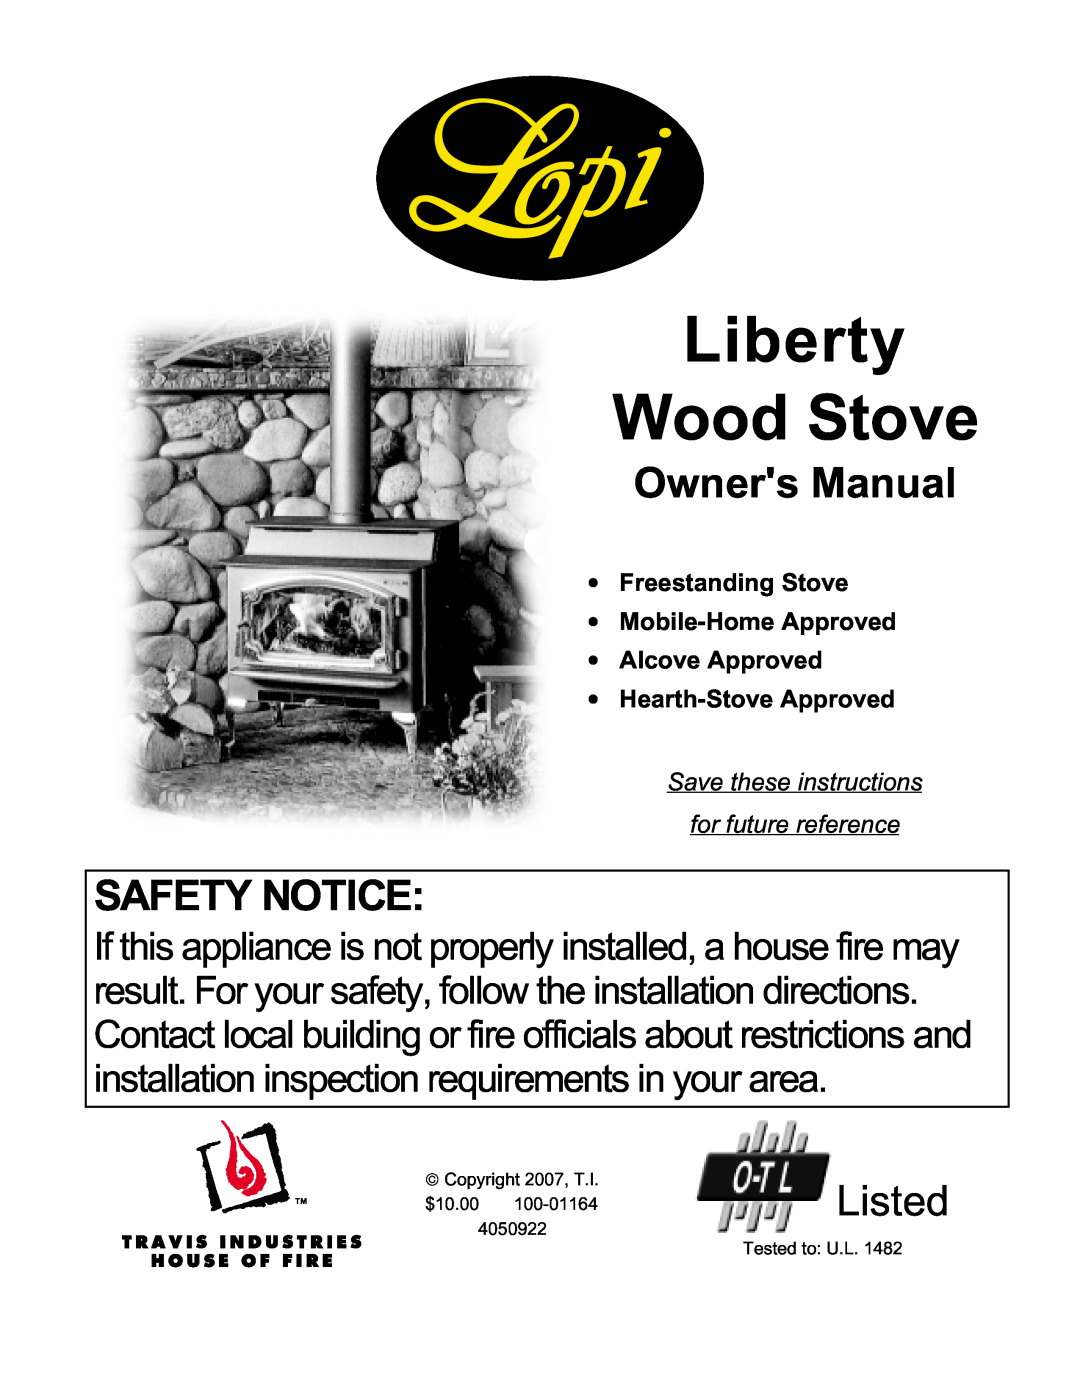 Lopi Liberty Wood Stove owner manual Safety Notice, Listed 